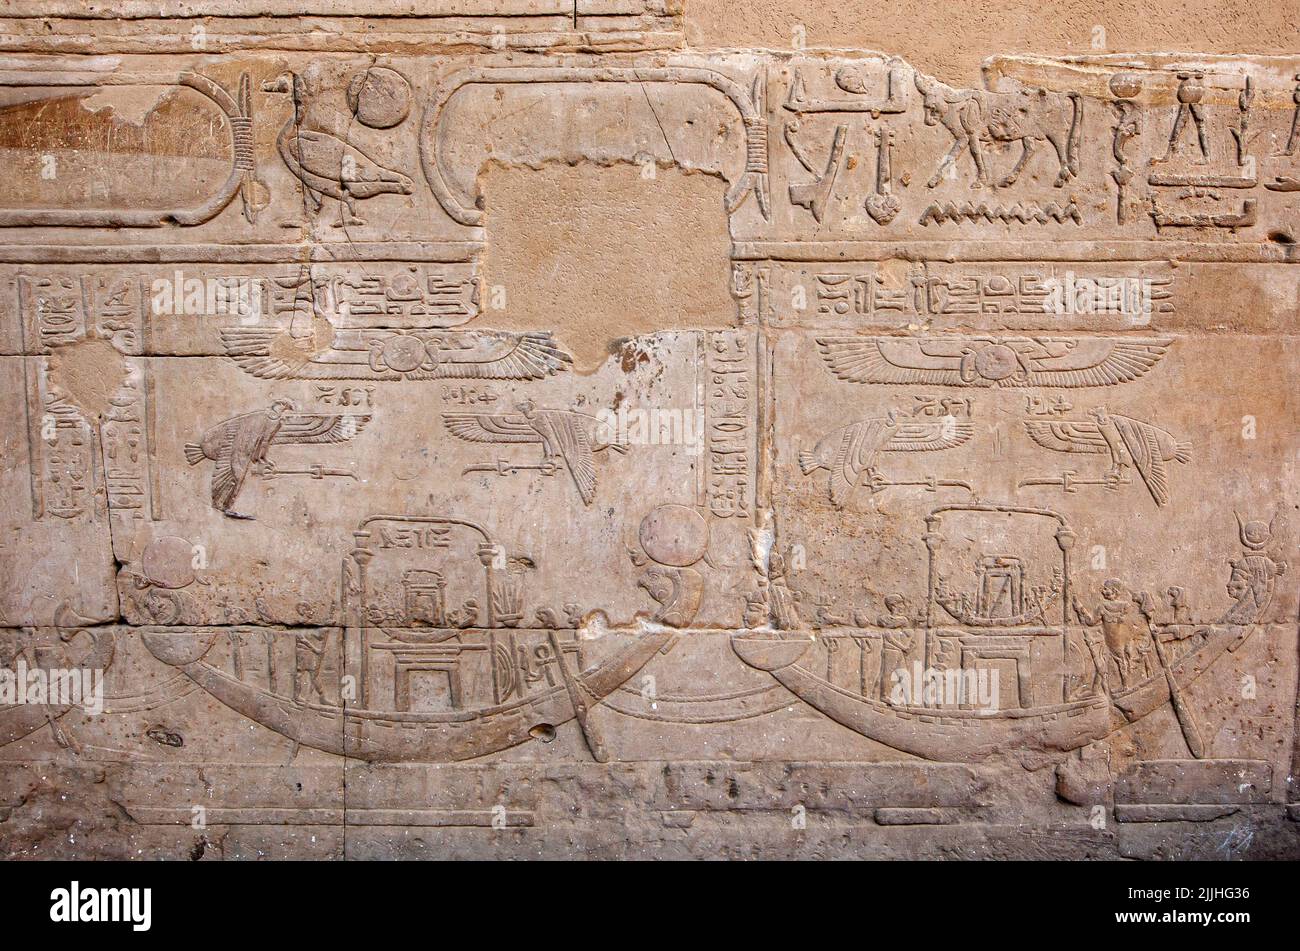 Engraved raised reliefs including boats and hieroglyphics on the pylon wall inside the Temple of Horus at Edfu in central Egypt. Stock Photo